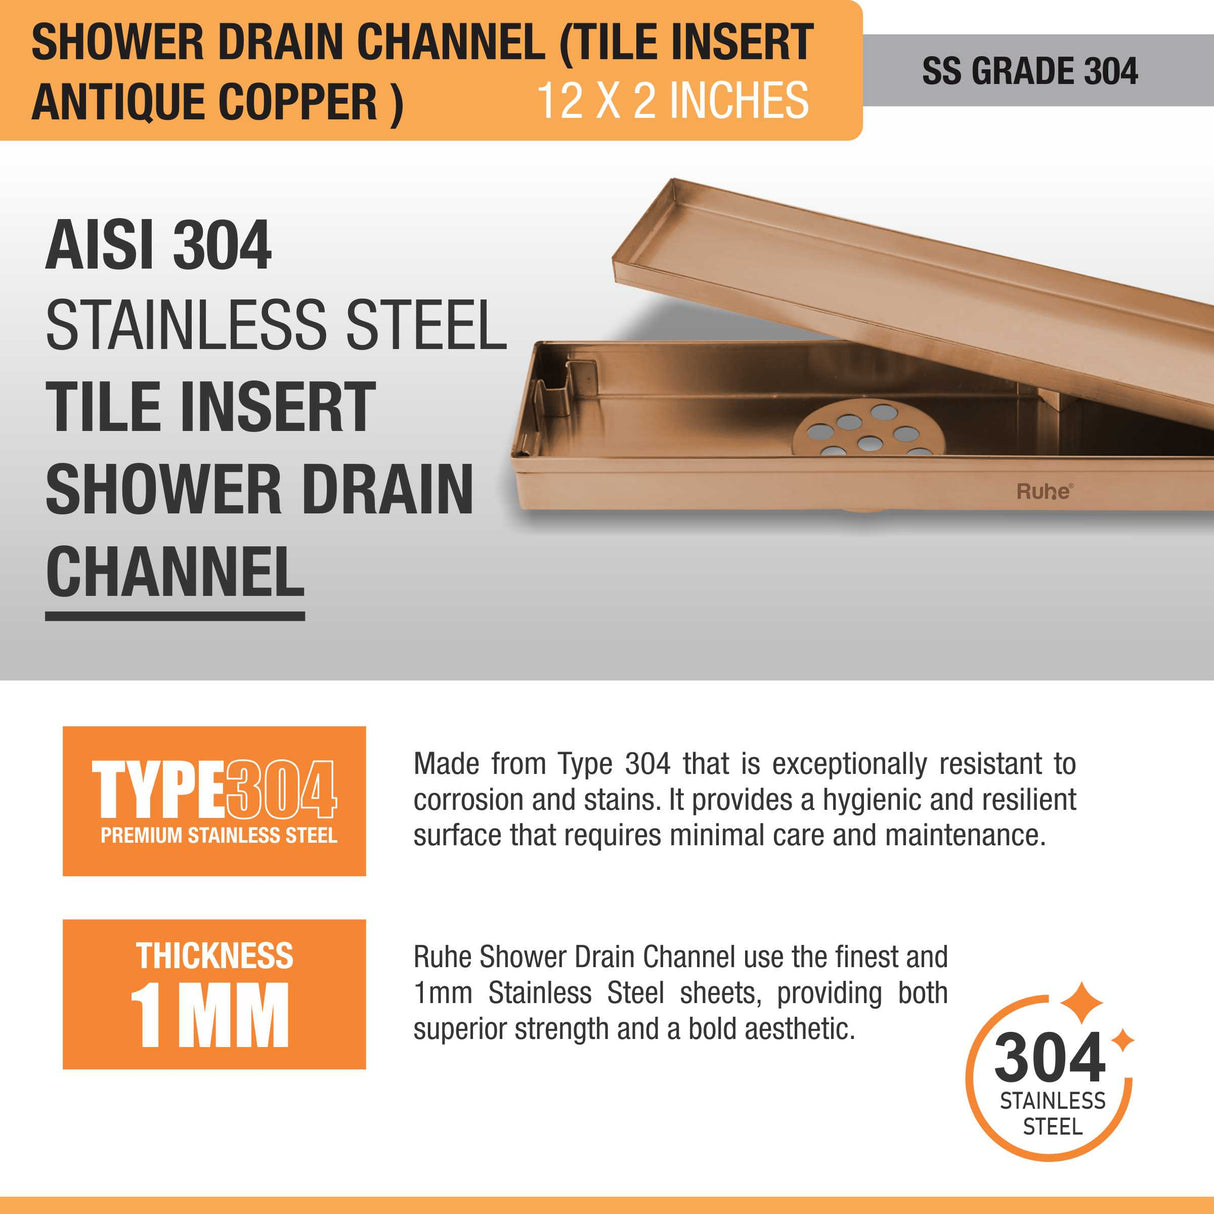 Tile Insert Shower Drain Channel (12 x 2 Inches) ROSE GOLD/ANTIQUE COPPER stainless steel